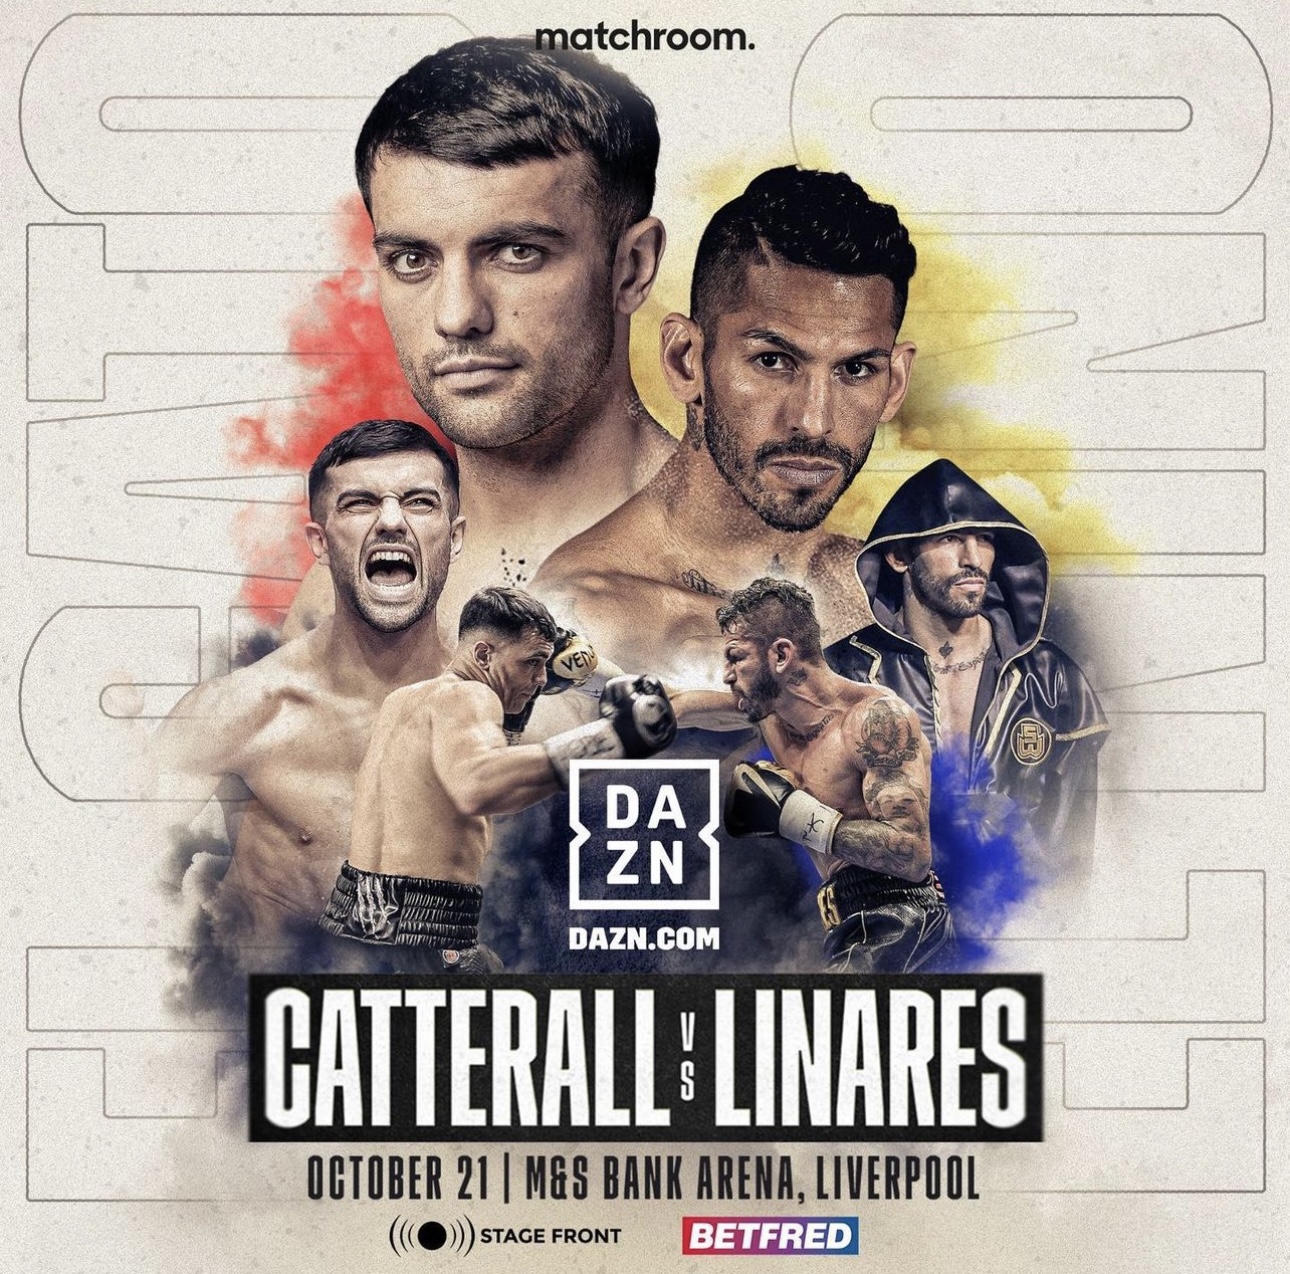 Catterall vs Linares